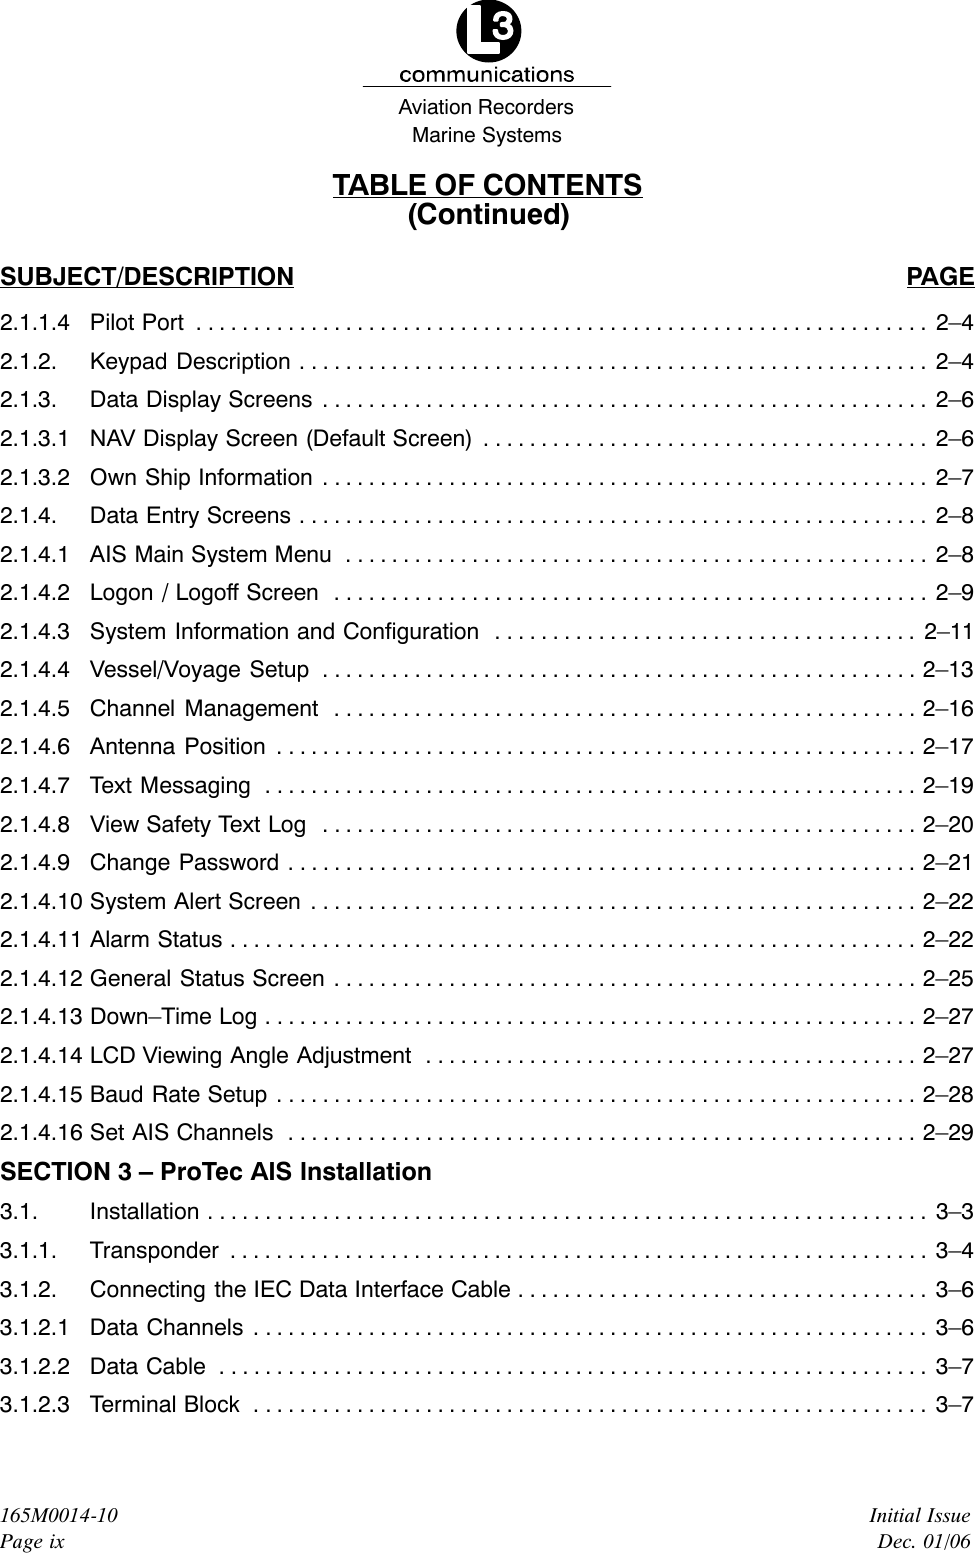 Marine SystemsAviation RecordersInitial IssueDec. 01/06165M0014-10Page ixTABLE OF CONTENTS(Continued)SUBJECT/DESCRIPTION PAGE2.1.1.4 Pilot Port 2–4. . . . . . . . . . . . . . . . . . . . . . . . . . . . . . . . . . . . . . . . . . . . . . . . . . . . . . . . . . . . . . . . 2.1.2. Keypad Description 2–4. . . . . . . . . . . . . . . . . . . . . . . . . . . . . . . . . . . . . . . . . . . . . . . . . . . . . . . 2.1.3. Data Display Screens 2–6. . . . . . . . . . . . . . . . . . . . . . . . . . . . . . . . . . . . . . . . . . . . . . . . . . . . . 2.1.3.1 NAV Display Screen (Default Screen) 2–6. . . . . . . . . . . . . . . . . . . . . . . . . . . . . . . . . . . . . . . 2.1.3.2 Own Ship Information 2–7. . . . . . . . . . . . . . . . . . . . . . . . . . . . . . . . . . . . . . . . . . . . . . . . . . . . . 2.1.4. Data Entry Screens 2–8. . . . . . . . . . . . . . . . . . . . . . . . . . . . . . . . . . . . . . . . . . . . . . . . . . . . . . . 2.1.4.1 AIS Main System Menu 2–8. . . . . . . . . . . . . . . . . . . . . . . . . . . . . . . . . . . . . . . . . . . . . . . . . . . 2.1.4.2 Logon / Logoff Screen 2–9. . . . . . . . . . . . . . . . . . . . . . . . . . . . . . . . . . . . . . . . . . . . . . . . . . . . 2.1.4.3 System Information and Configuration 2–11. . . . . . . . . . . . . . . . . . . . . . . . . . . . . . . . . . . . . 2.1.4.4 Vessel/Voyage Setup 2–13. . . . . . . . . . . . . . . . . . . . . . . . . . . . . . . . . . . . . . . . . . . . . . . . . . . . 2.1.4.5 Channel Management 2–16. . . . . . . . . . . . . . . . . . . . . . . . . . . . . . . . . . . . . . . . . . . . . . . . . . . 2.1.4.6 Antenna Position 2–17. . . . . . . . . . . . . . . . . . . . . . . . . . . . . . . . . . . . . . . . . . . . . . . . . . . . . . . . 2.1.4.7 Text Messaging 2–19. . . . . . . . . . . . . . . . . . . . . . . . . . . . . . . . . . . . . . . . . . . . . . . . . . . . . . . . . 2.1.4.8 View Safety Text Log 2–20. . . . . . . . . . . . . . . . . . . . . . . . . . . . . . . . . . . . . . . . . . . . . . . . . . . . 2.1.4.9 Change Password 2–21. . . . . . . . . . . . . . . . . . . . . . . . . . . . . . . . . . . . . . . . . . . . . . . . . . . . . . . 2.1.4.10 System Alert Screen 2–22. . . . . . . . . . . . . . . . . . . . . . . . . . . . . . . . . . . . . . . . . . . . . . . . . . . . . 2.1.4.11 Alarm Status 2–22. . . . . . . . . . . . . . . . . . . . . . . . . . . . . . . . . . . . . . . . . . . . . . . . . . . . . . . . . . . . 2.1.4.12 General Status Screen 2–25. . . . . . . . . . . . . . . . . . . . . . . . . . . . . . . . . . . . . . . . . . . . . . . . . . . 2.1.4.13 Down–Time Log 2–27. . . . . . . . . . . . . . . . . . . . . . . . . . . . . . . . . . . . . . . . . . . . . . . . . . . . . . . . . 2.1.4.14 LCD Viewing Angle Adjustment 2–27. . . . . . . . . . . . . . . . . . . . . . . . . . . . . . . . . . . . . . . . . . . 2.1.4.15 Baud Rate Setup 2–28. . . . . . . . . . . . . . . . . . . . . . . . . . . . . . . . . . . . . . . . . . . . . . . . . . . . . . . . 2.1.4.16 Set AIS Channels 2–29. . . . . . . . . . . . . . . . . . . . . . . . . . . . . . . . . . . . . . . . . . . . . . . . . . . . . . . SECTION 3 – ProTec AIS Installation3.1. Installation 3–3. . . . . . . . . . . . . . . . . . . . . . . . . . . . . . . . . . . . . . . . . . . . . . . . . . . . . . . . . . . . . . . 3.1.1. Transponder 3–4. . . . . . . . . . . . . . . . . . . . . . . . . . . . . . . . . . . . . . . . . . . . . . . . . . . . . . . . . . . . . 3.1.2. Connecting the IEC Data Interface Cable 3–6. . . . . . . . . . . . . . . . . . . . . . . . . . . . . . . . . . . . 3.1.2.1 Data Channels 3–6. . . . . . . . . . . . . . . . . . . . . . . . . . . . . . . . . . . . . . . . . . . . . . . . . . . . . . . . . . . 3.1.2.2 Data Cable 3–7. . . . . . . . . . . . . . . . . . . . . . . . . . . . . . . . . . . . . . . . . . . . . . . . . . . . . . . . . . . . . . 3.1.2.3 Terminal Block 3–7. . . . . . . . . . . . . . . . . . . . . . . . . . . . . . . . . . . . . . . . . . . . . . . . . . . . . . . . . . . 